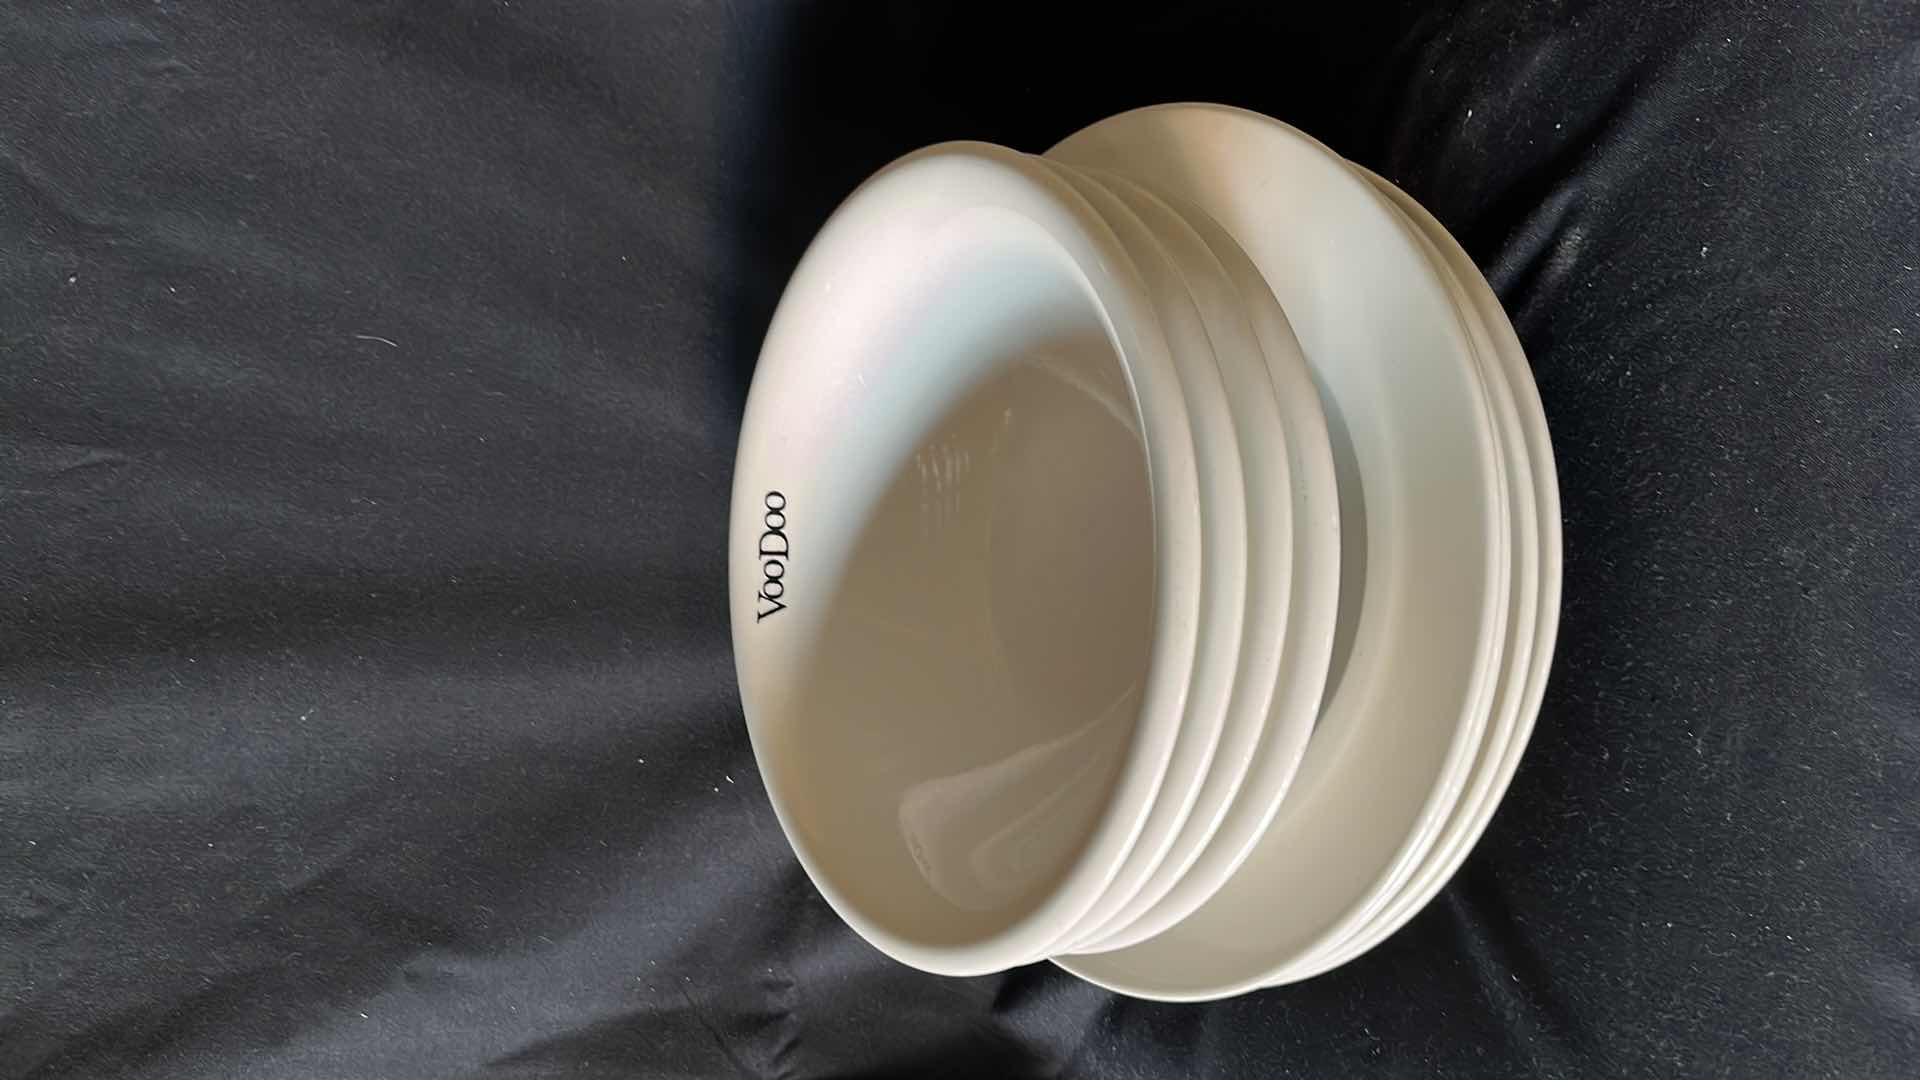 Photo 2 of DUDSON FINEST VOODOO SERVING BOWLS AND SERVING PLATES (SETS OF 4)